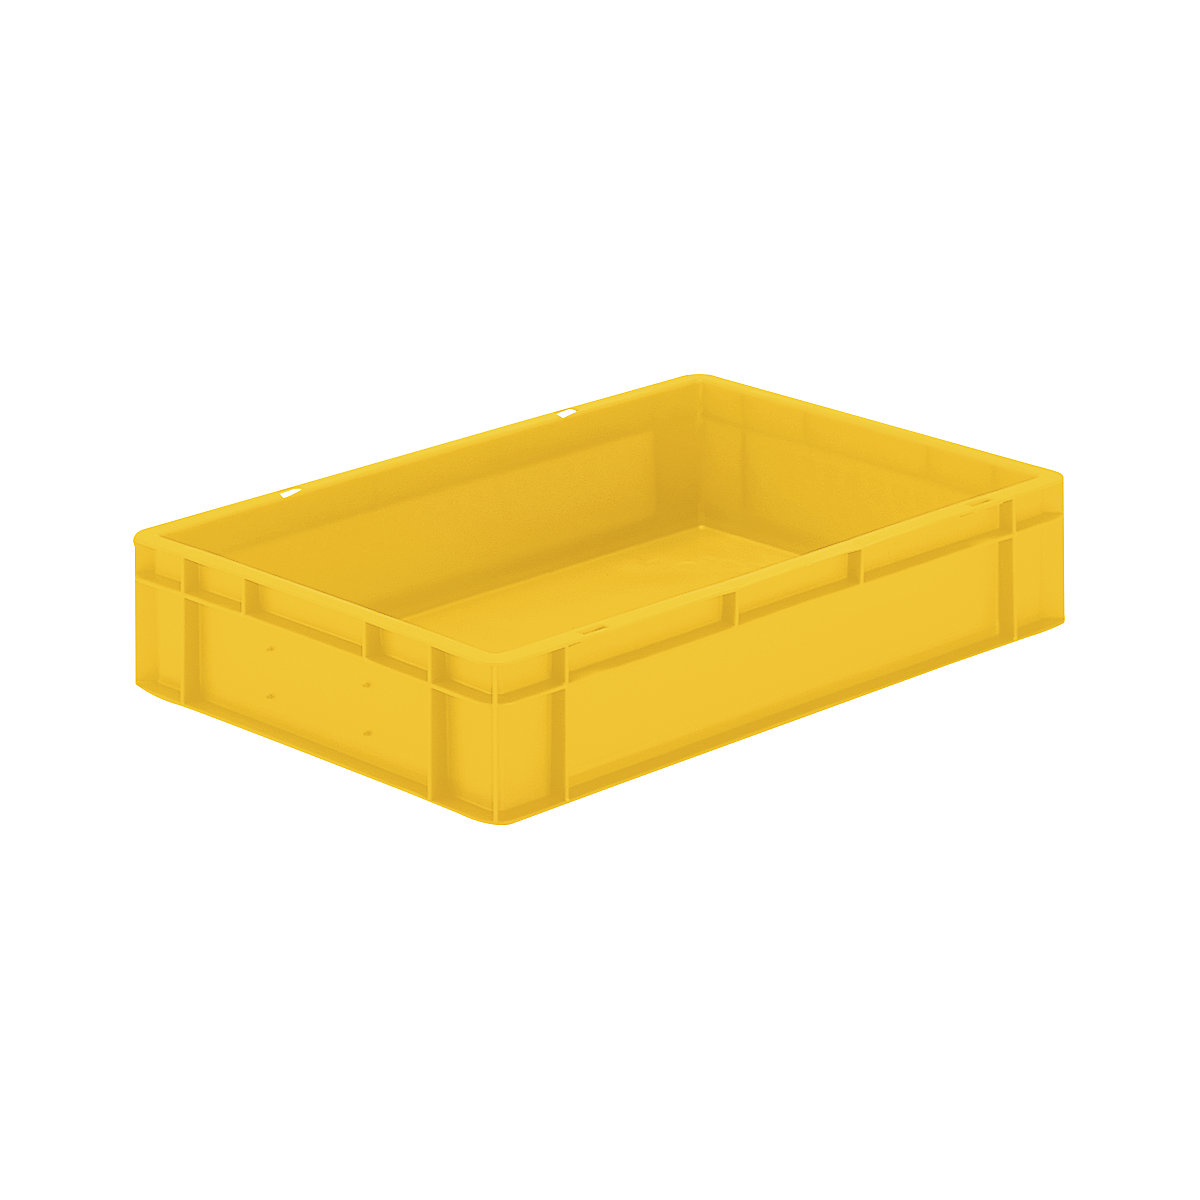 Euro stacking container, closed walls and base, LxWxH 600 x 400 x 120 mm, yellow, pack of 5-7